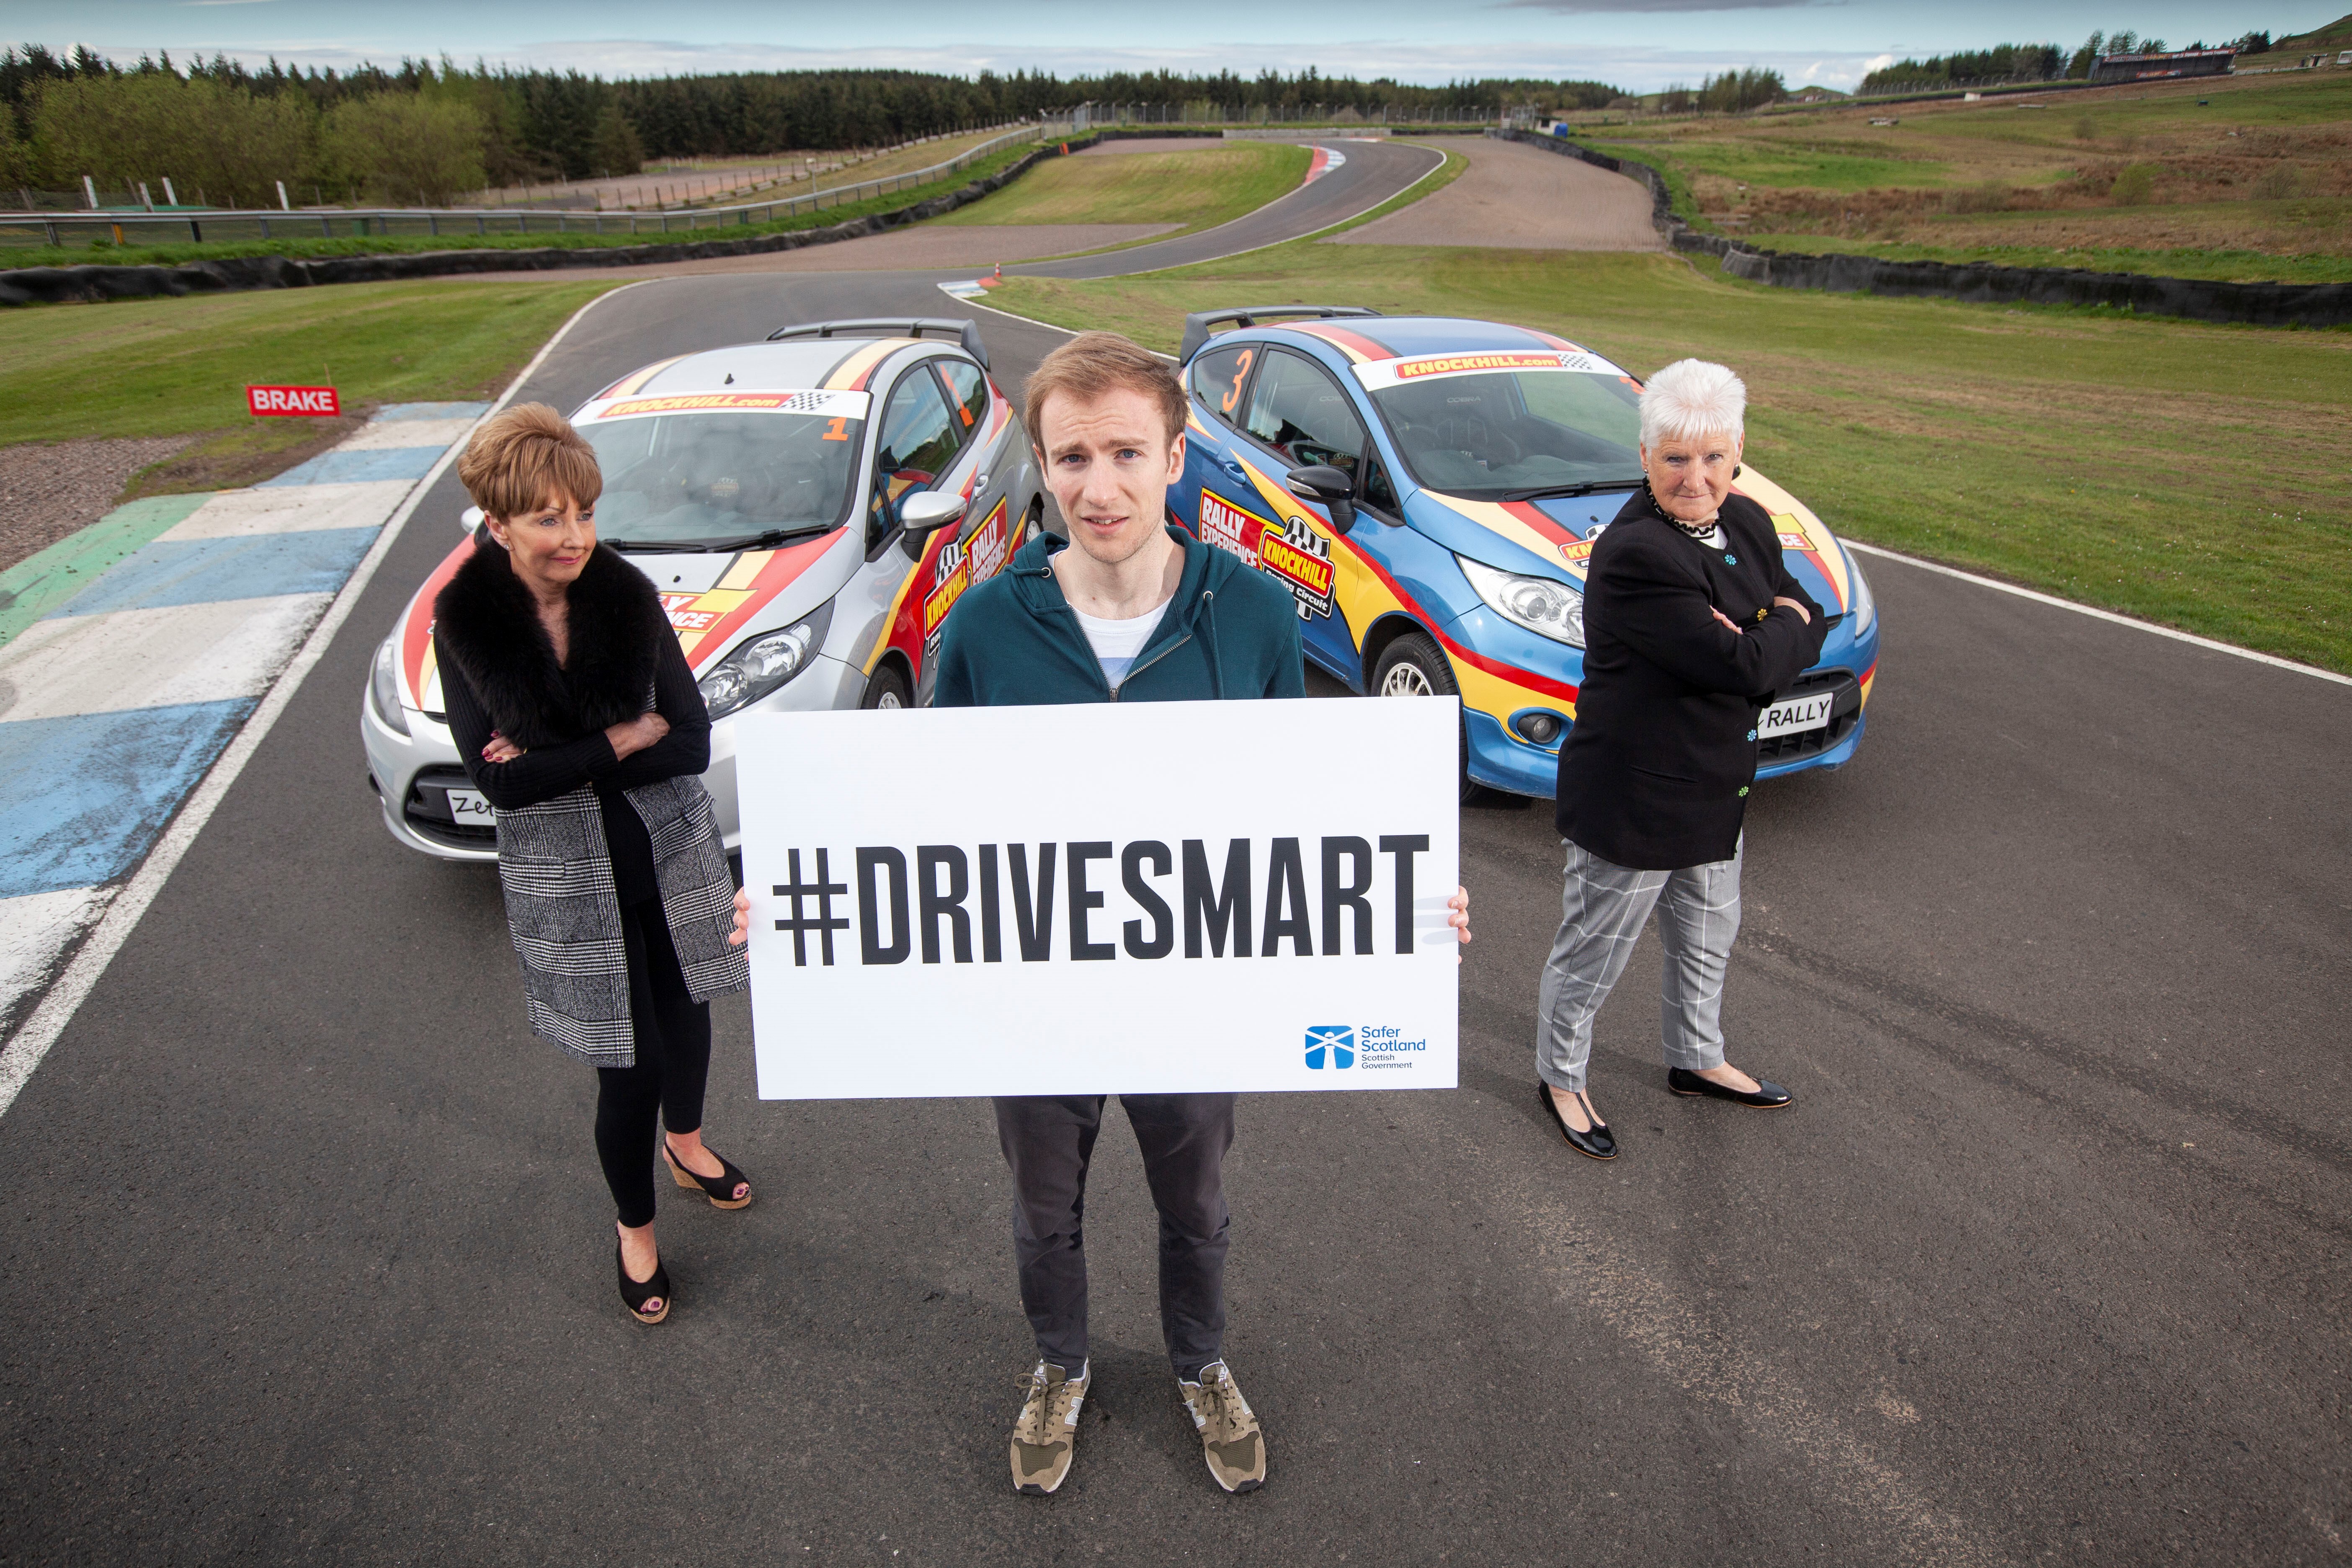 The campaign launched at Knockhill